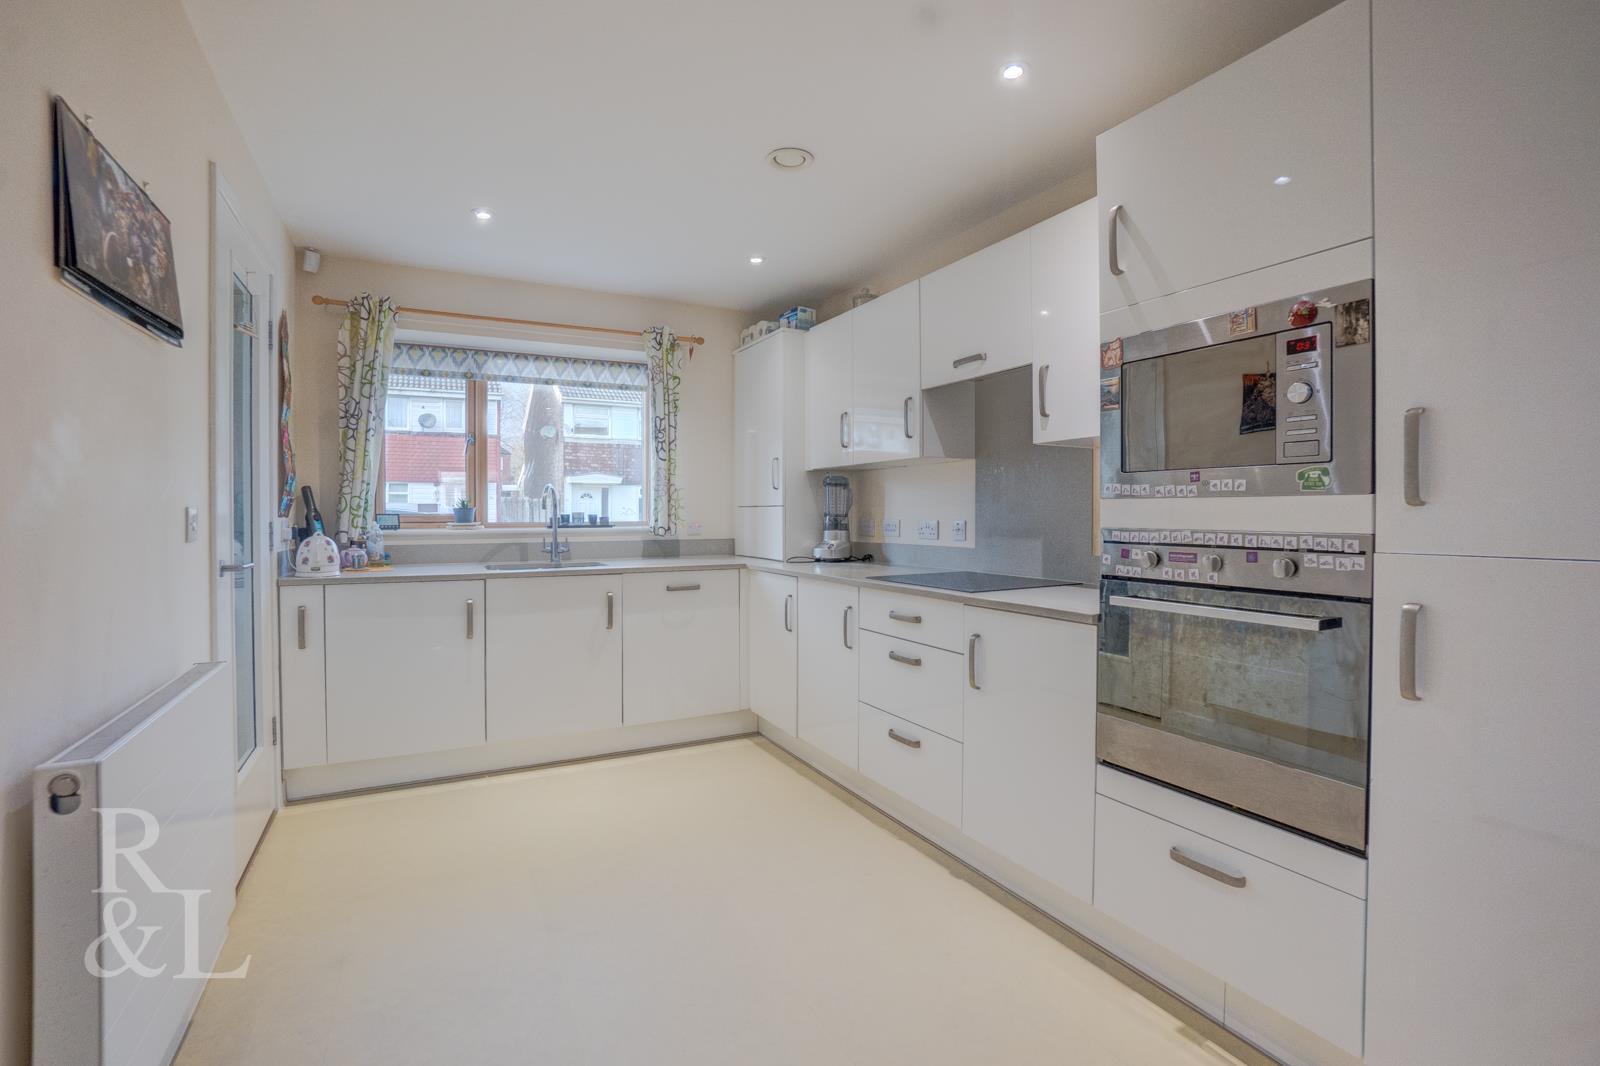 Property image for Wilford Crescent West, Meadows, Nottingham